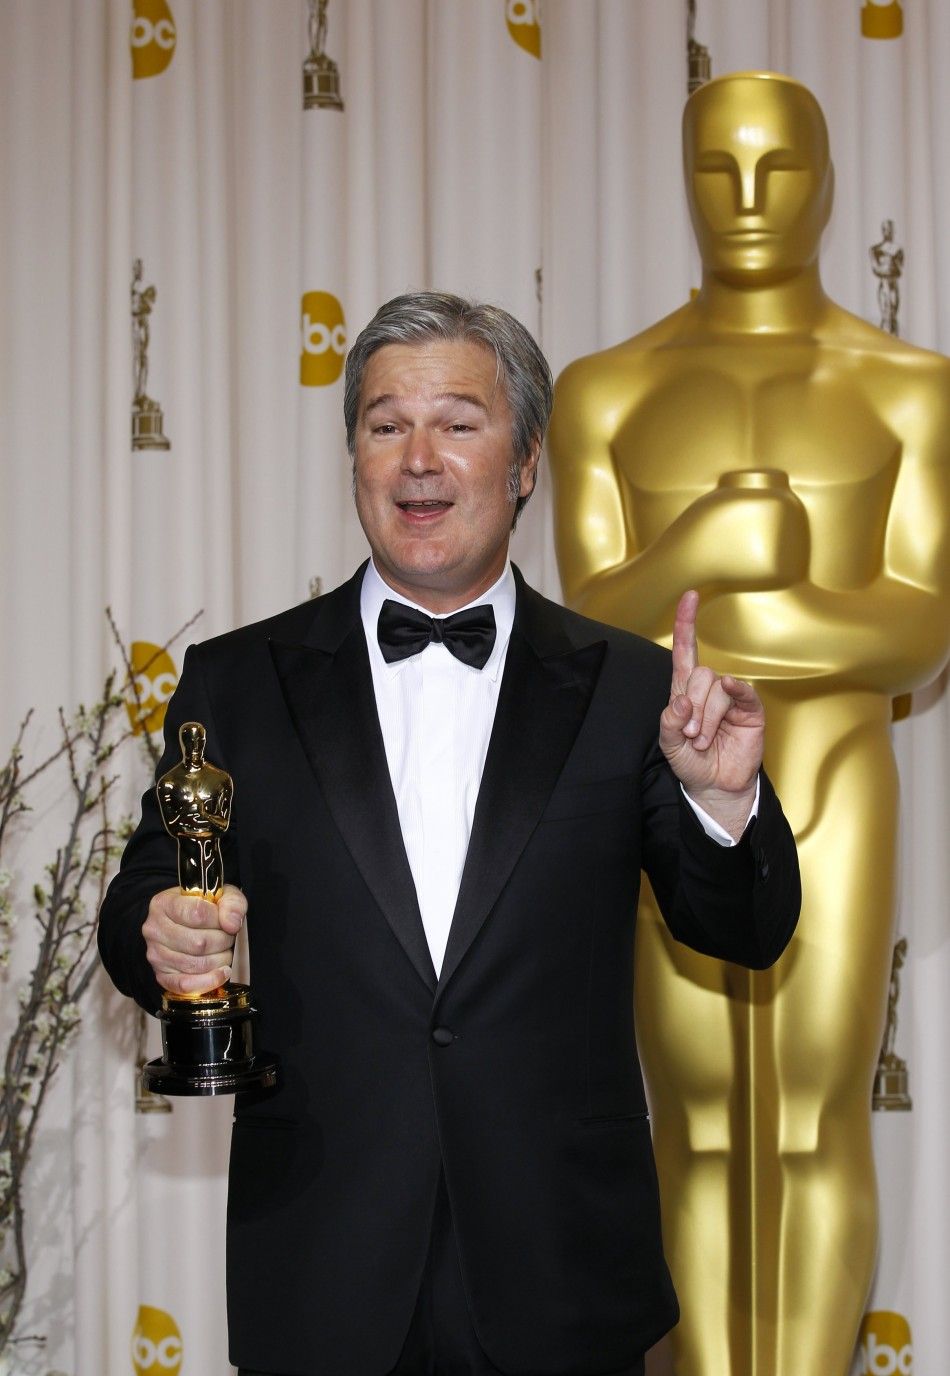 Director Verbinski, winner of Animated Feature Film award for quotRangoquot, poses at 84th Academy Awards in Hollywood